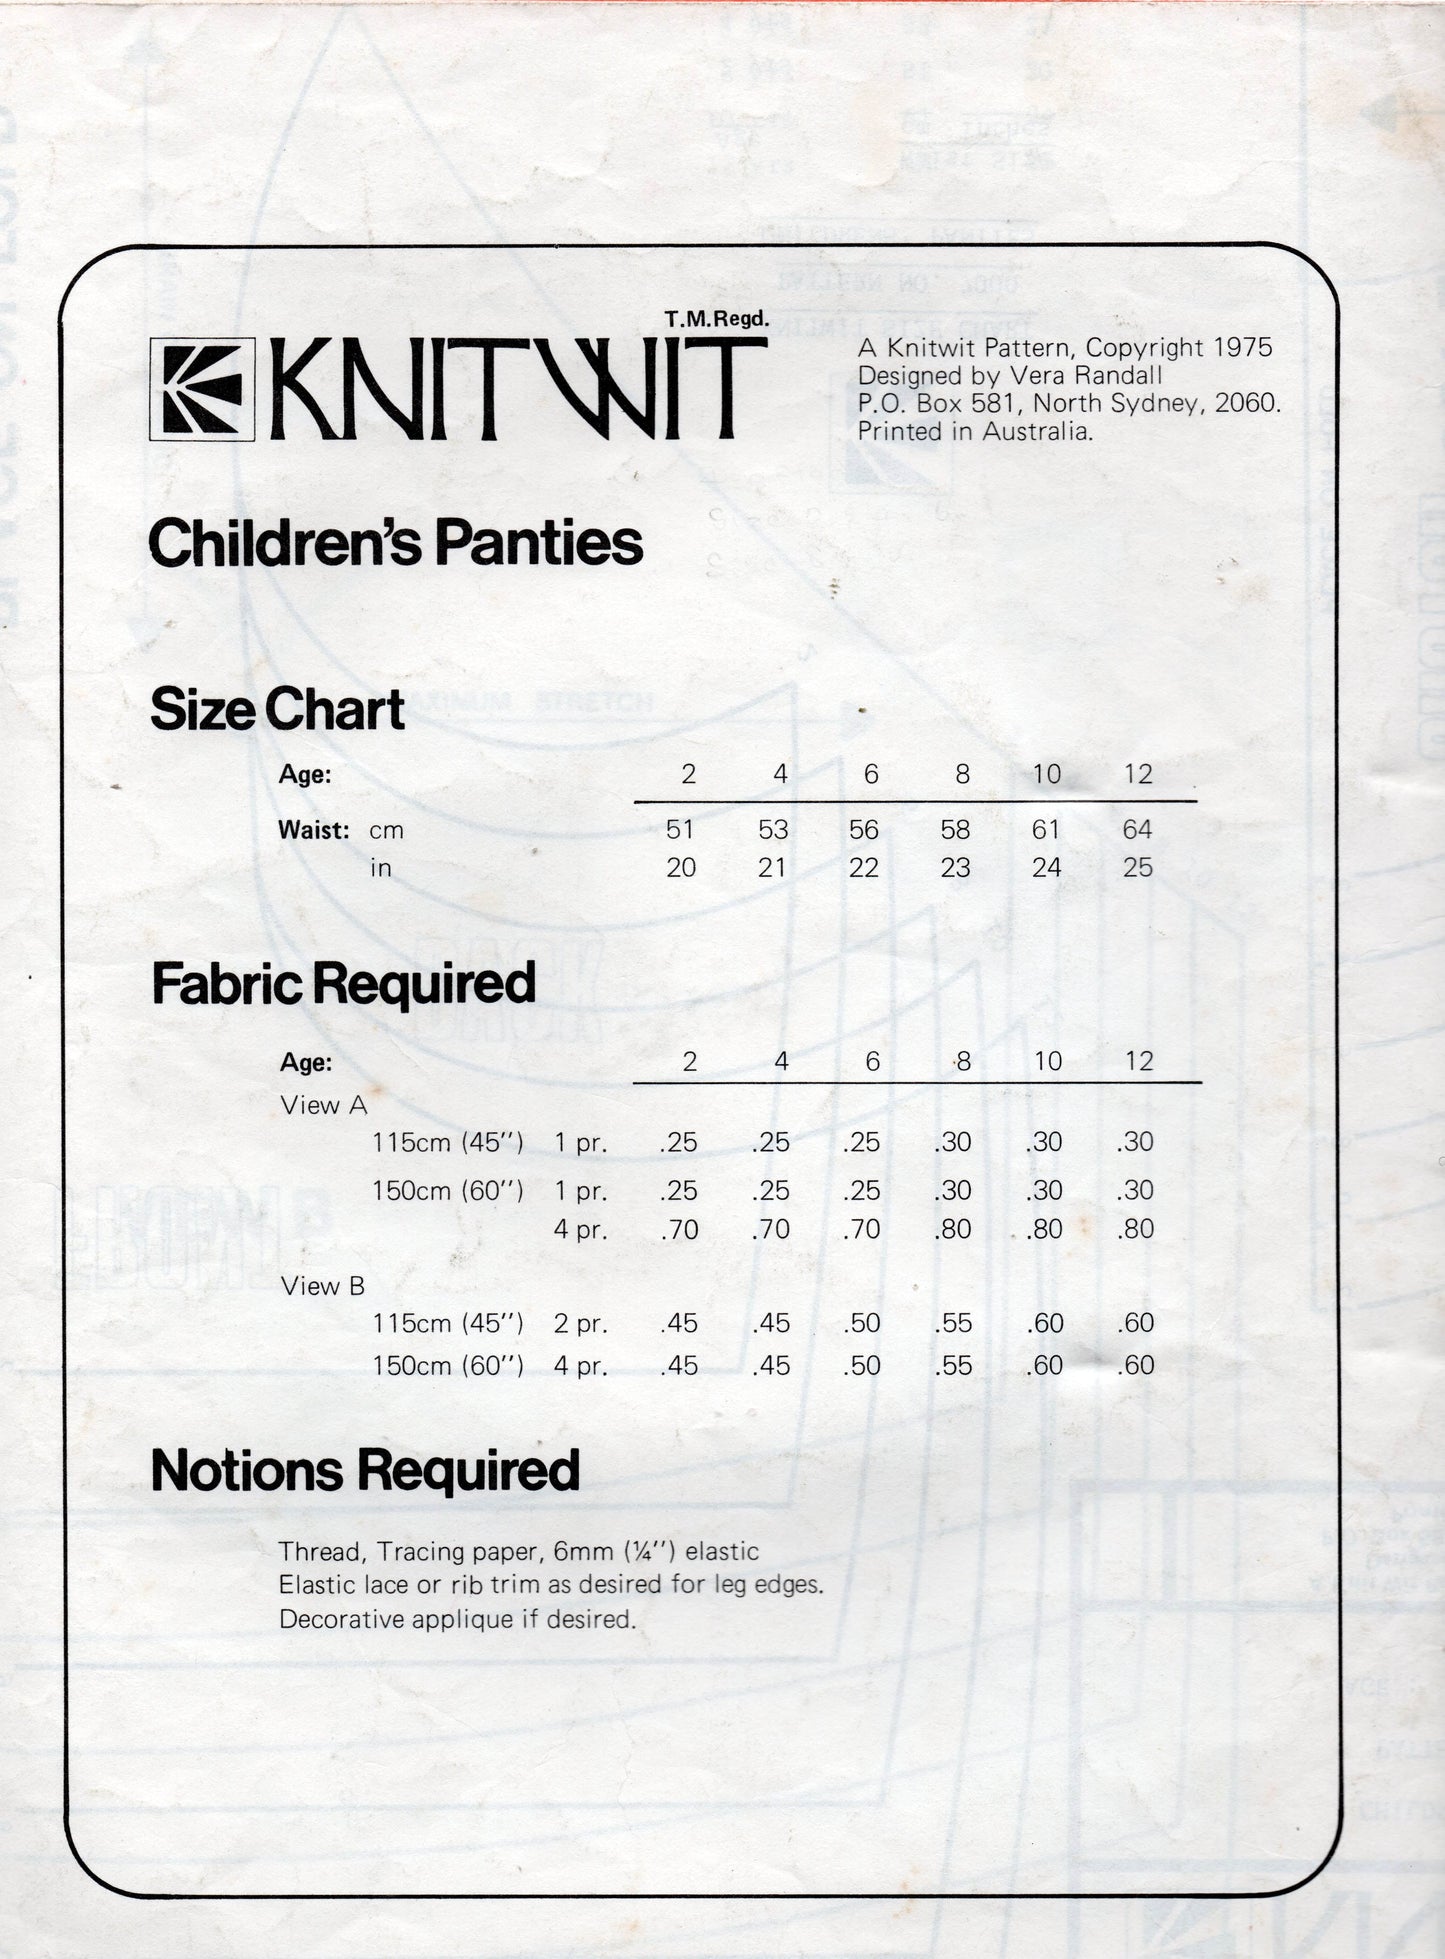 Knitwit 7000 Toddlers & Girls Panties Underwear 1970s Vintage Sewing Pattern Sizes 2 - 12 UNCUT Factory Folded